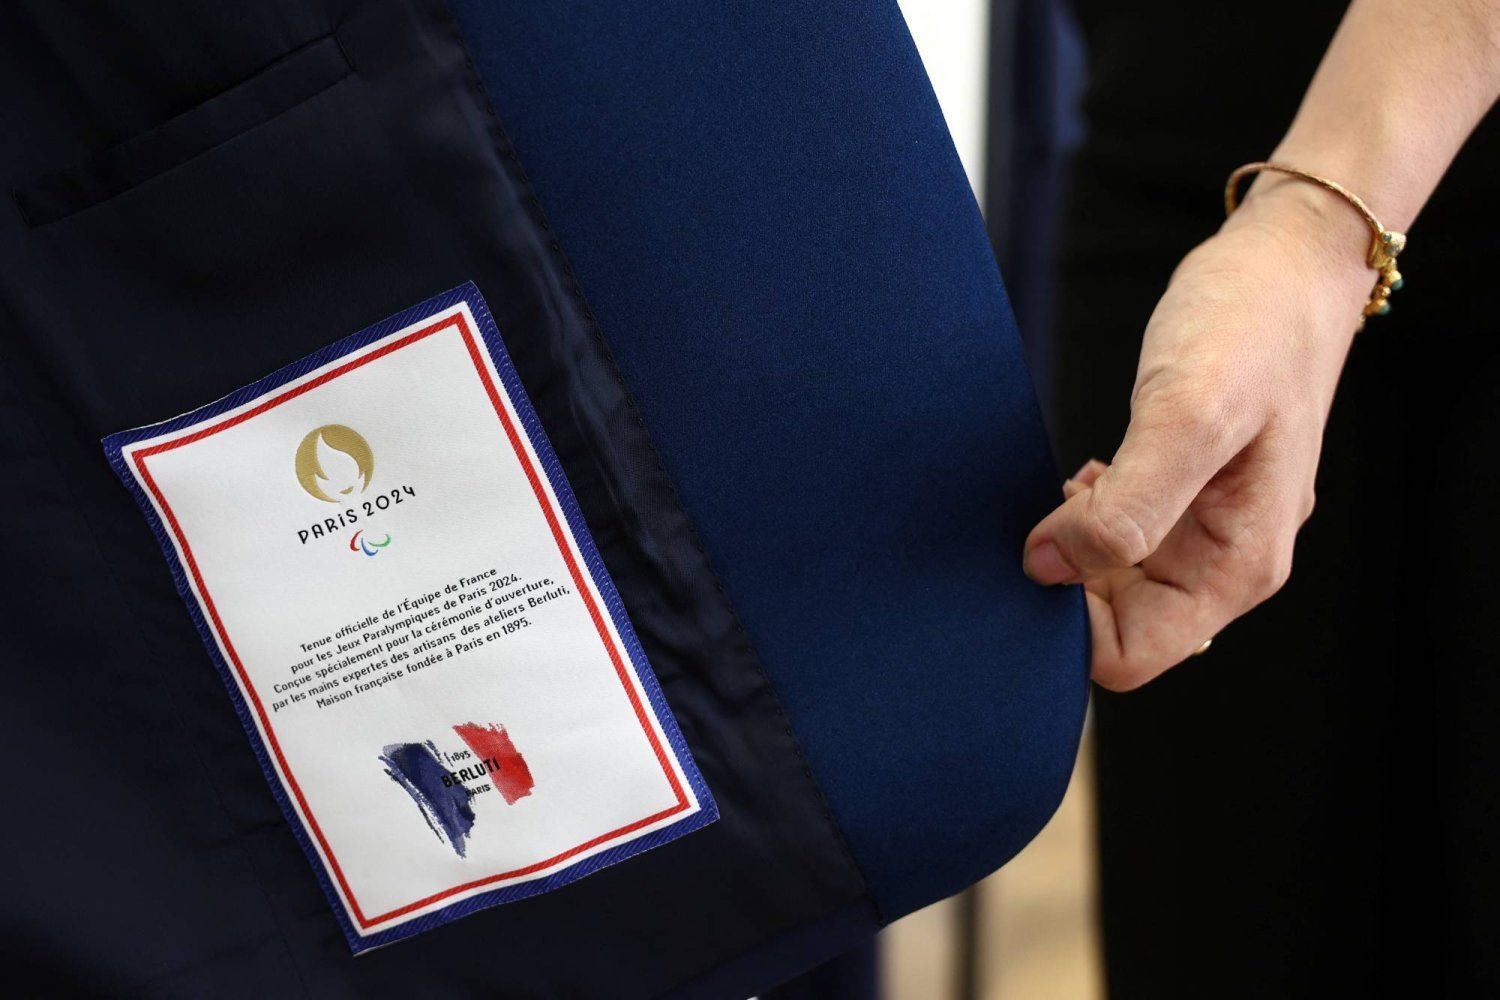 An employee shows the Paris 2024 - Berluti label sewn inside the suit jacket for the French team athletes for the opening ceremony by LVMH's upscale menswear label Berluti, in a showroom at Berluti headquarters in Paris, France, April 10, 2024.  REUTERS/Stephanie Lecocq